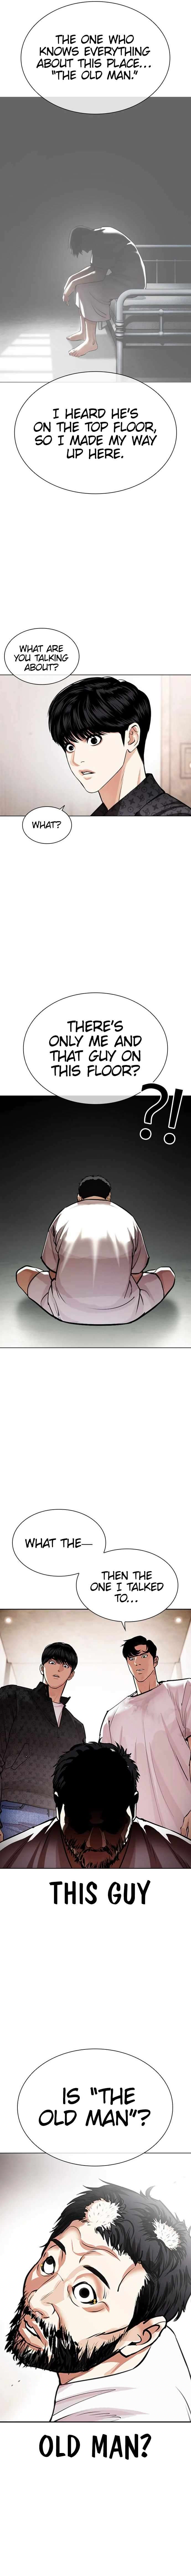 Lookism Chapter 462 image 08